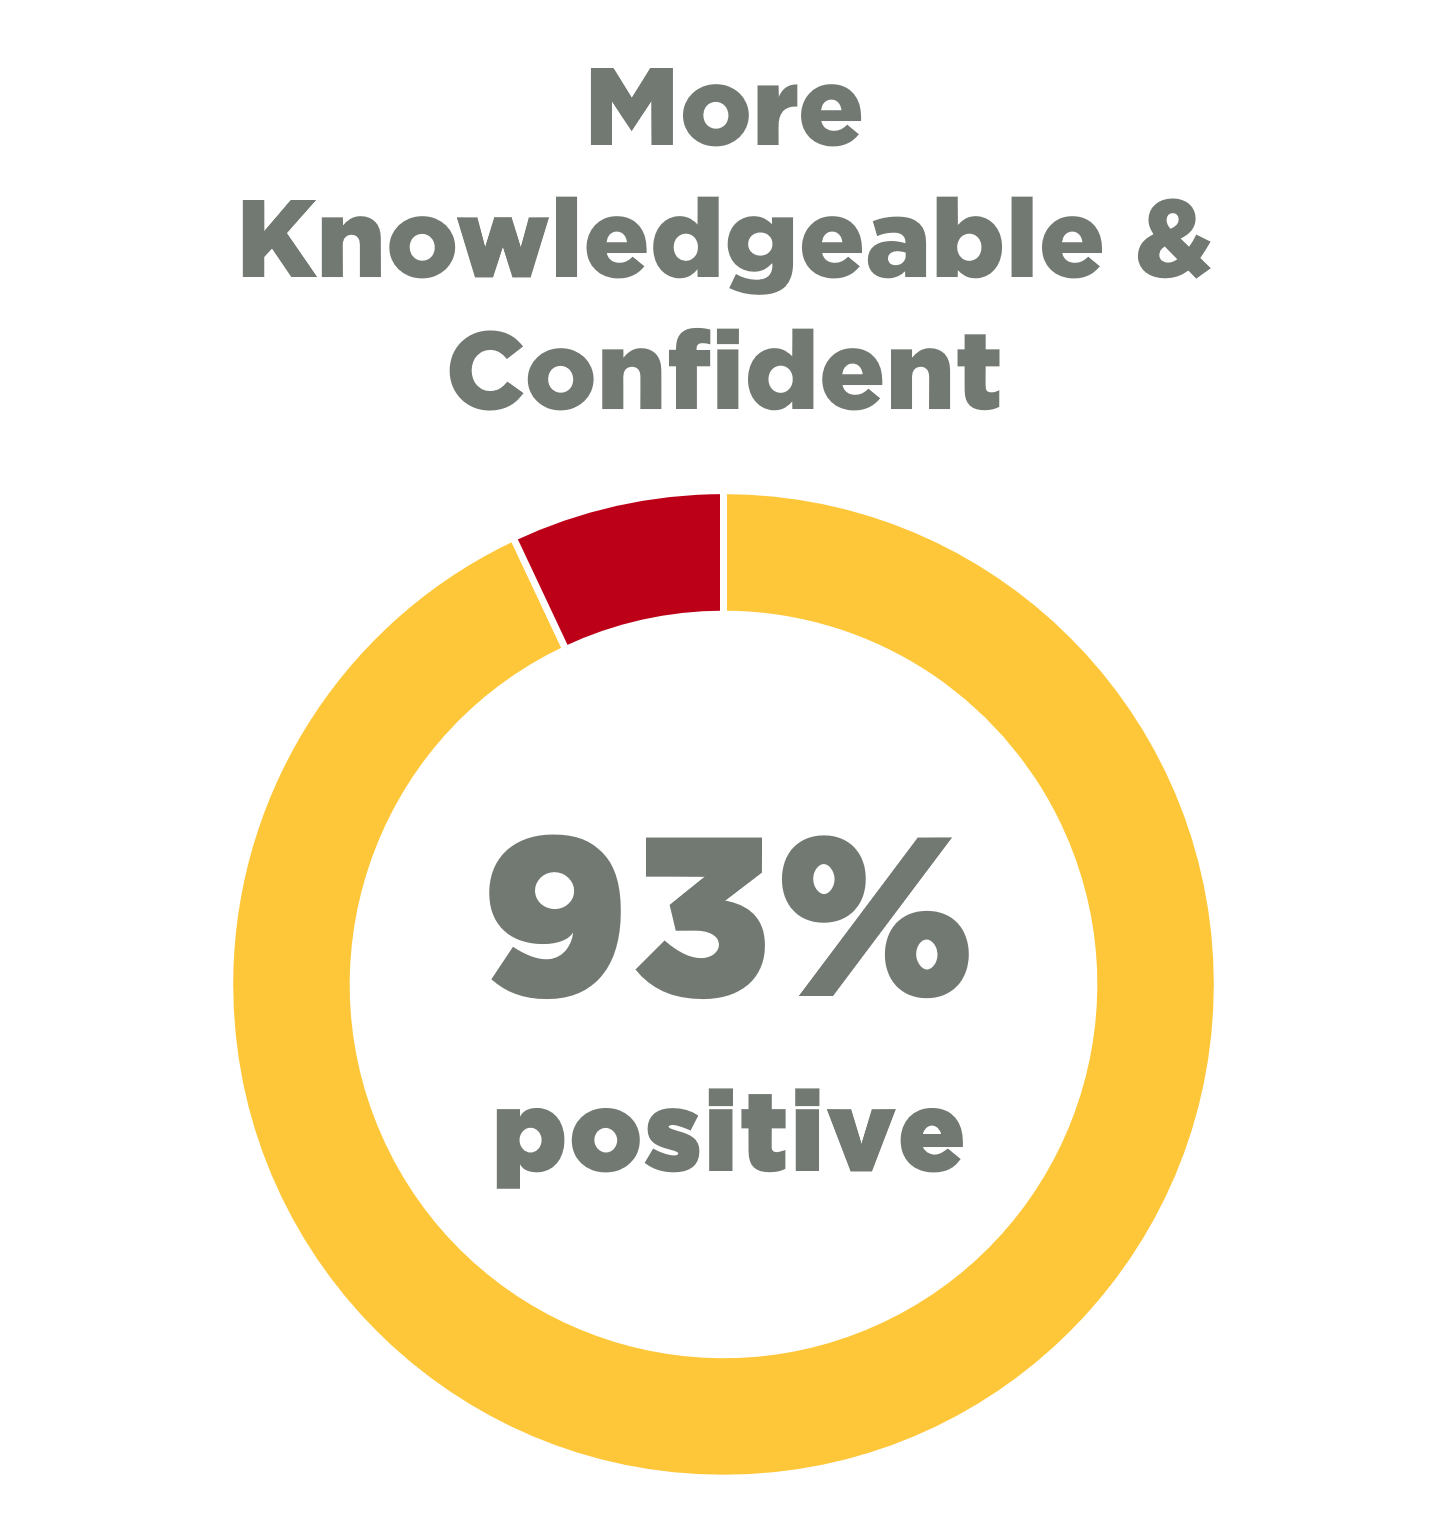 The title 'More knowledgeable & confident' displayed above a yellow ring that is coloured 93% yellow and 7% red. The words '93% positive' is within the ring.